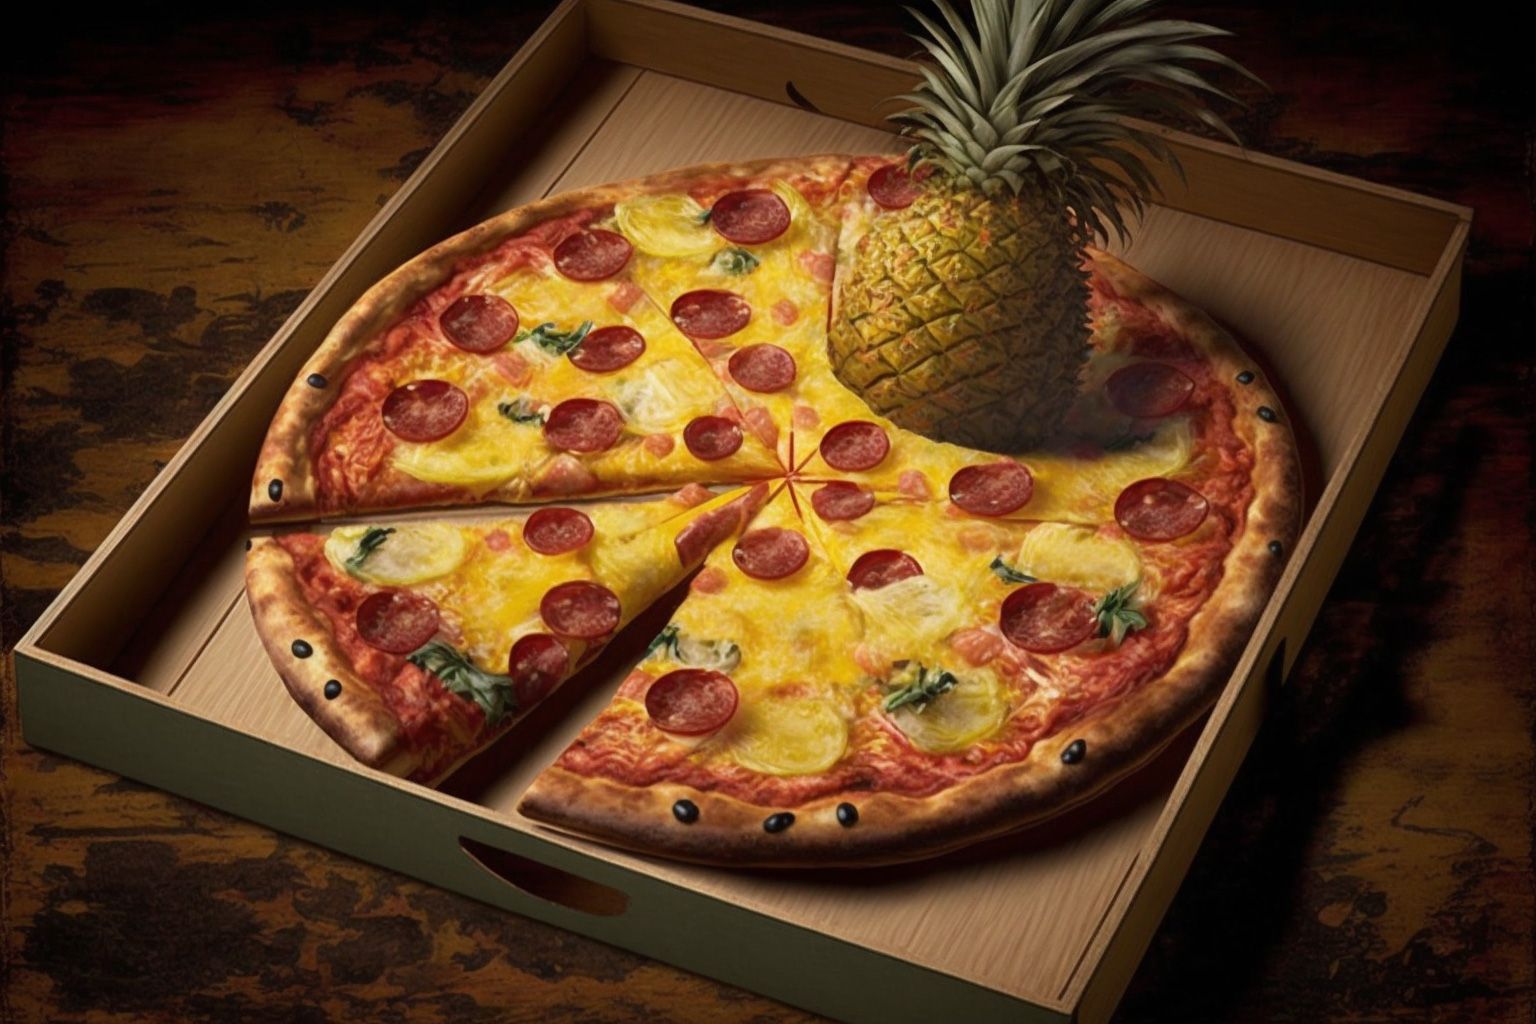 A pizza with slices of pepperoni and half a pineapple in an open pizza box